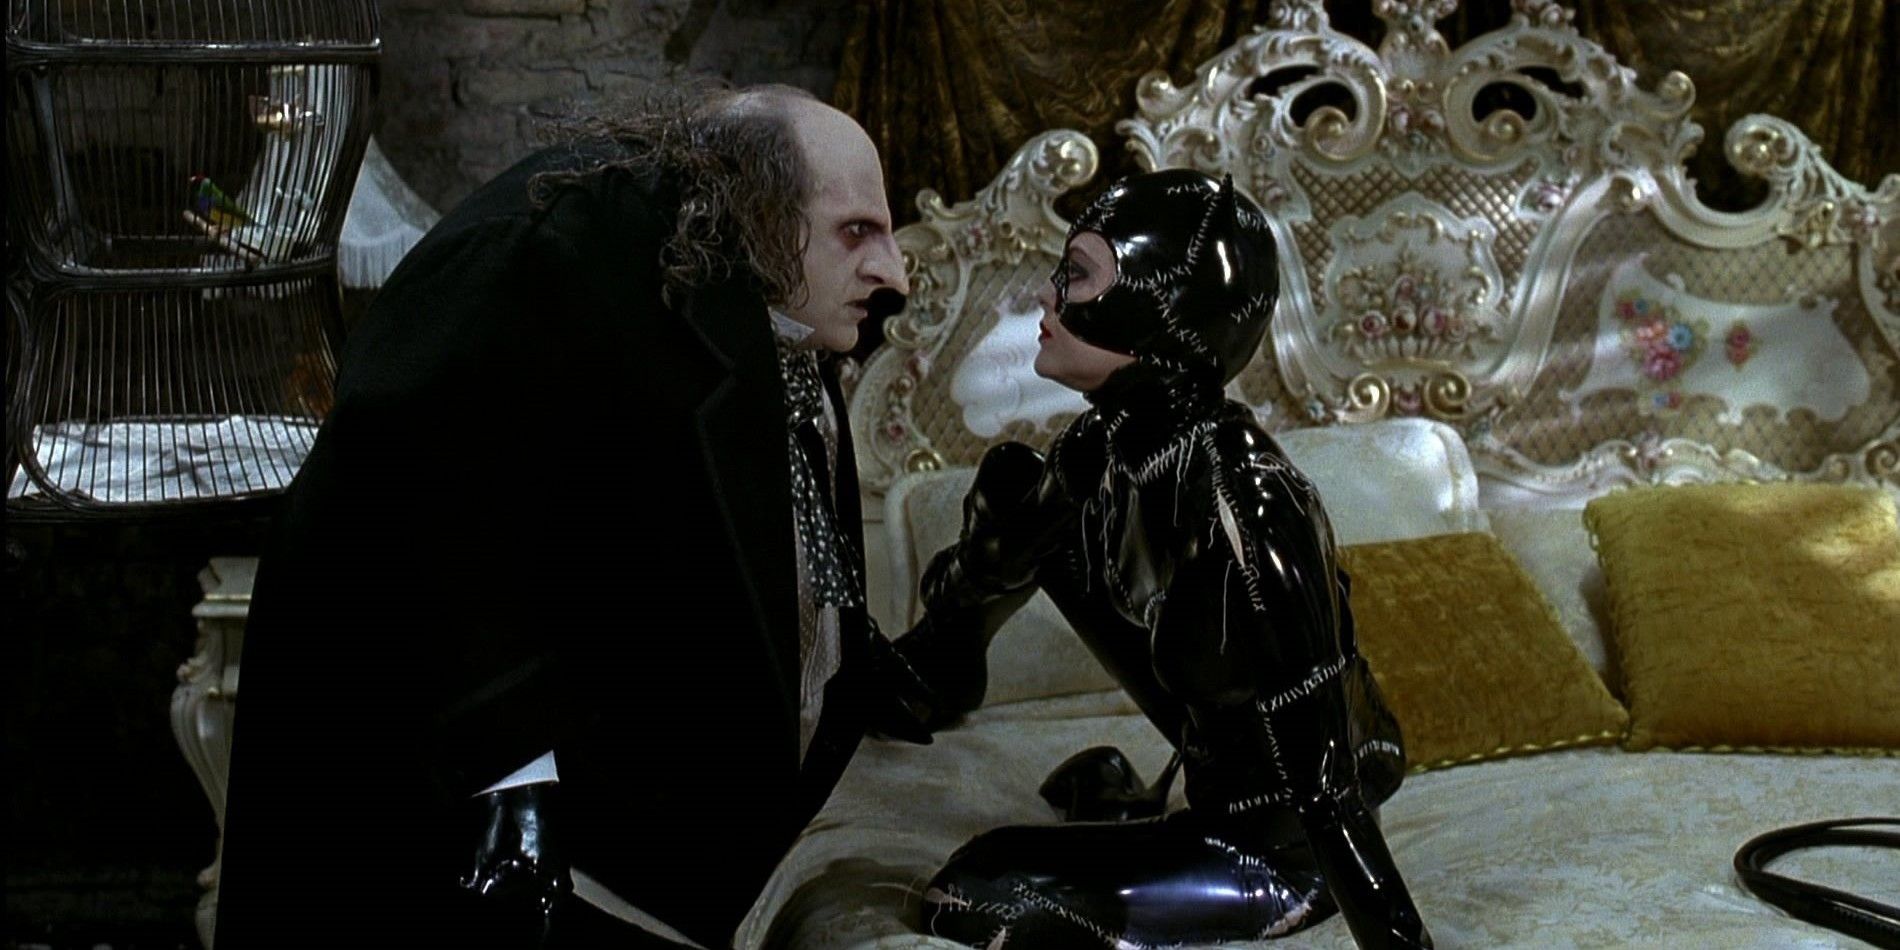 Danny DeVito as Oswald Cobblepot Penguin and Michelle Pfeiffer as Selina Kyle Catwoman sit on a bed in Batman Returns